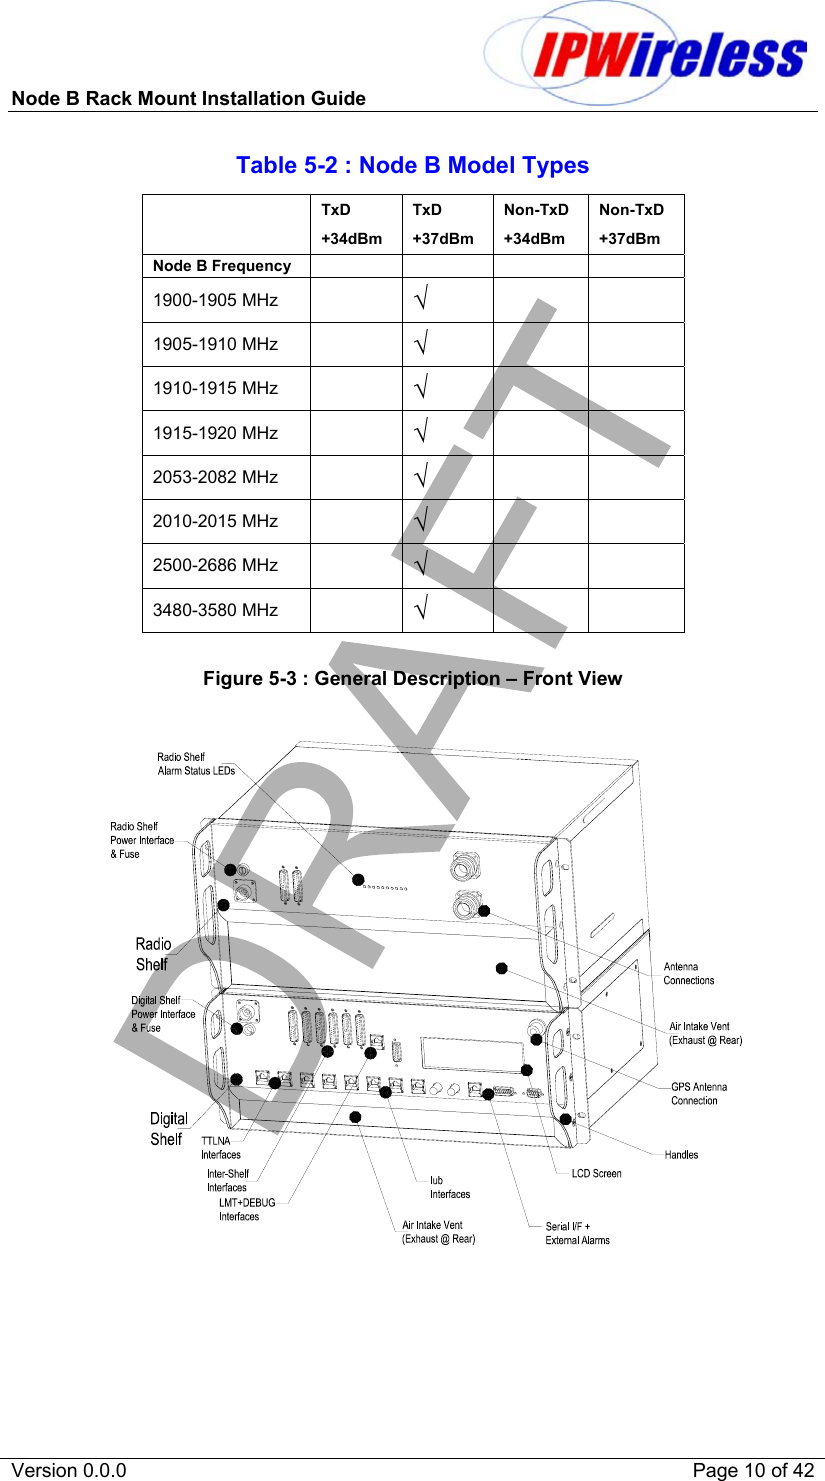 Node B Rack Mount Installation Guide                           Version 0.0.0    Page 10 of 42 Table 5-2 : Node B Model Types  TxD  +34dBm TxD +37dBm Non-TxD +34dBm Non-TxD +37dBm Node B Frequency         1900-1905 MHz   √   1905-1910 MHz    √   1910-1915 MHz    √   1915-1920 MHz    √   2053-2082 MHz    √   2010-2015 MHz    √   2500-2686 MHz    √   3480-3580 MHz    √    Figure 5-3 : General Description – Front View    